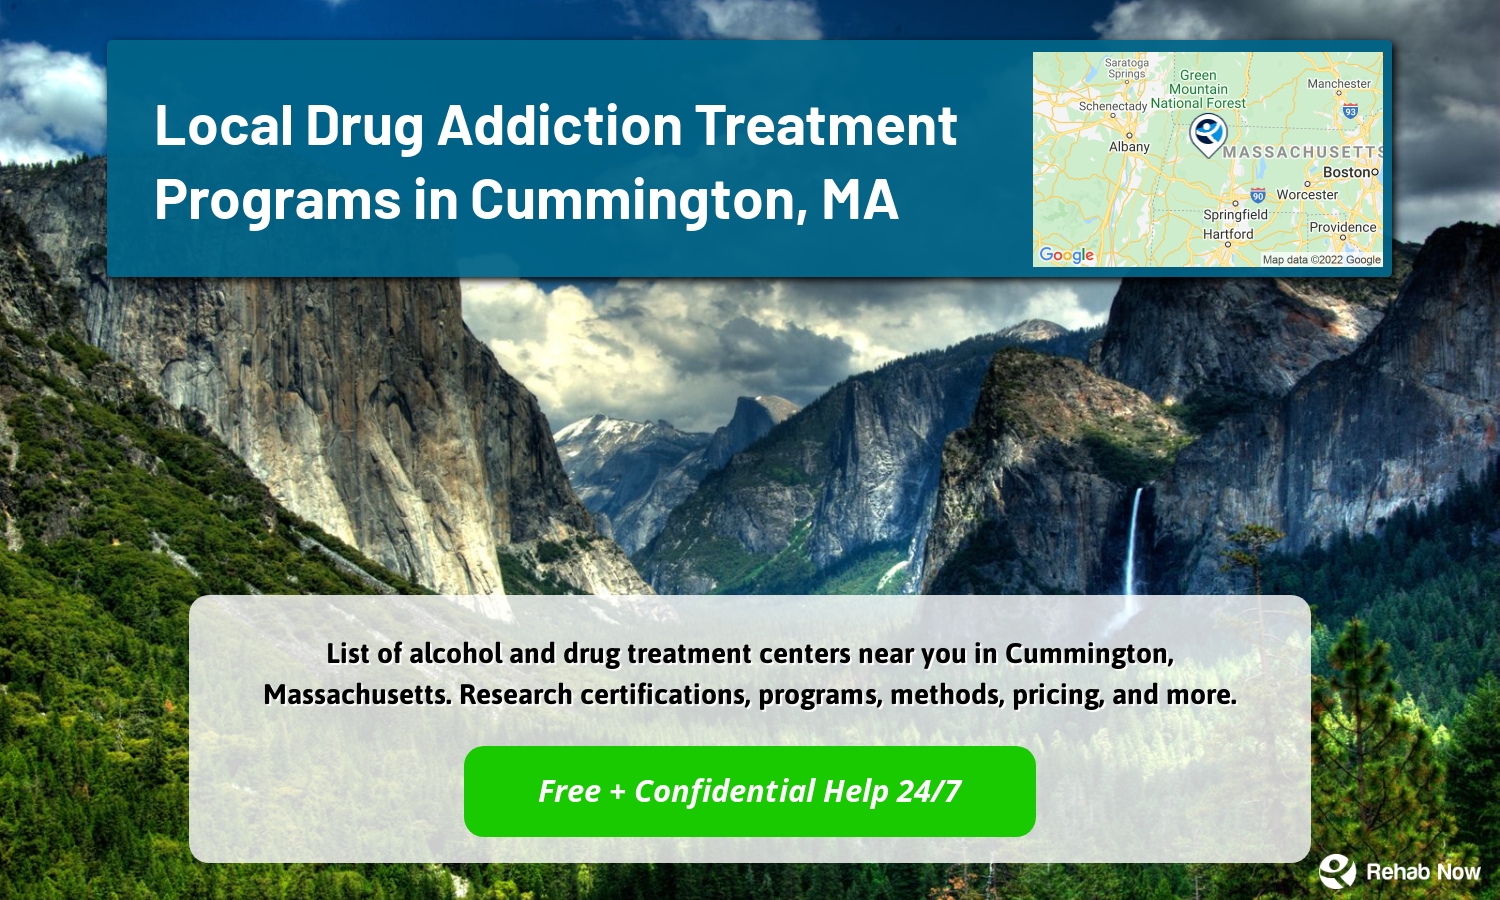 List of alcohol and drug treatment centers near you in Cummington, Massachusetts. Research certifications, programs, methods, pricing, and more.